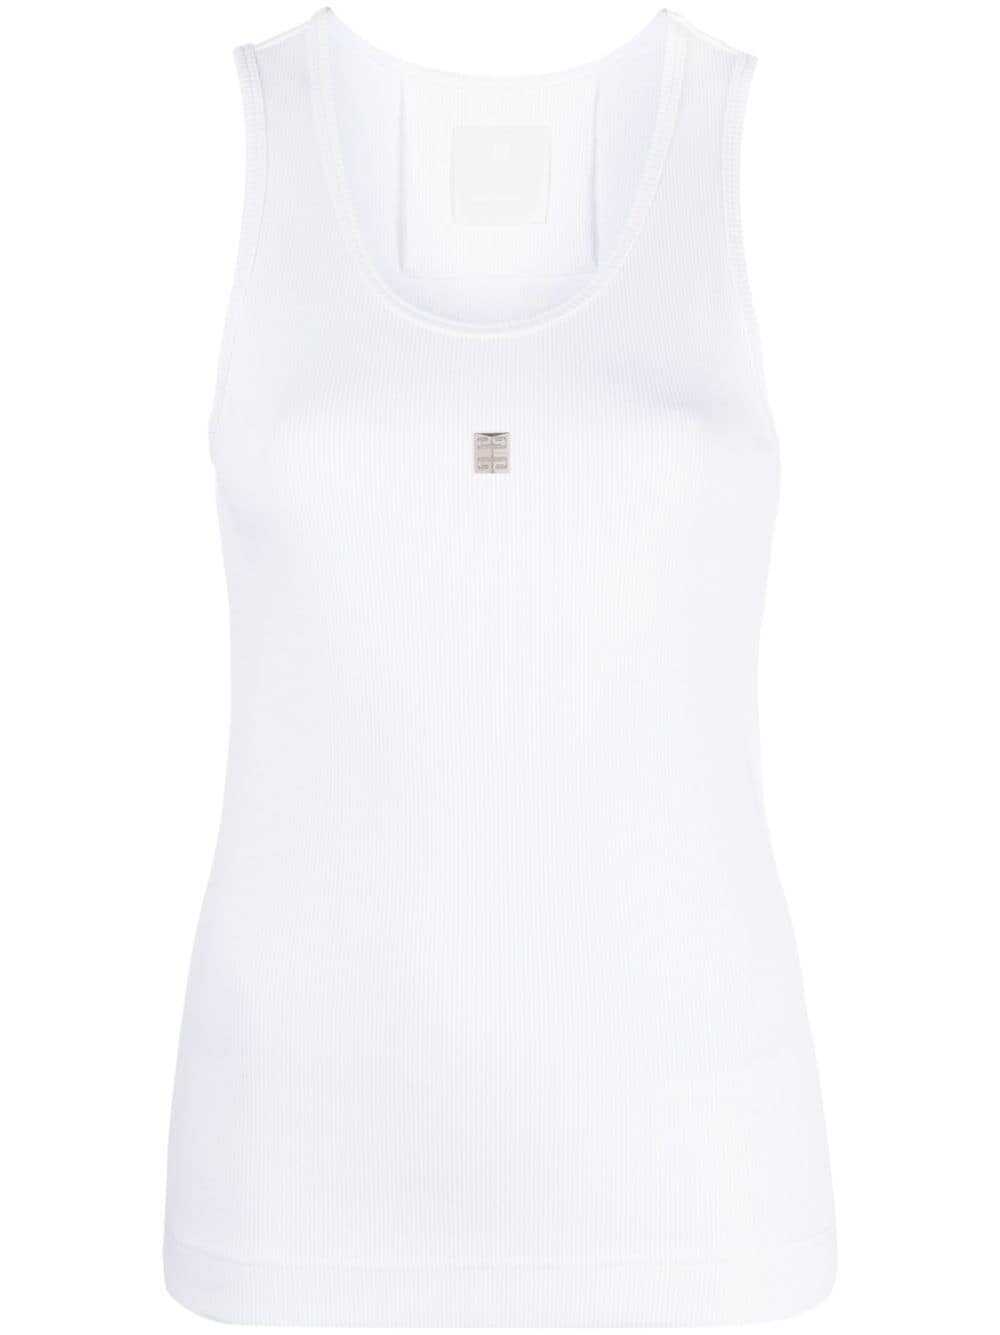 Givenchy Givenchy Top White White